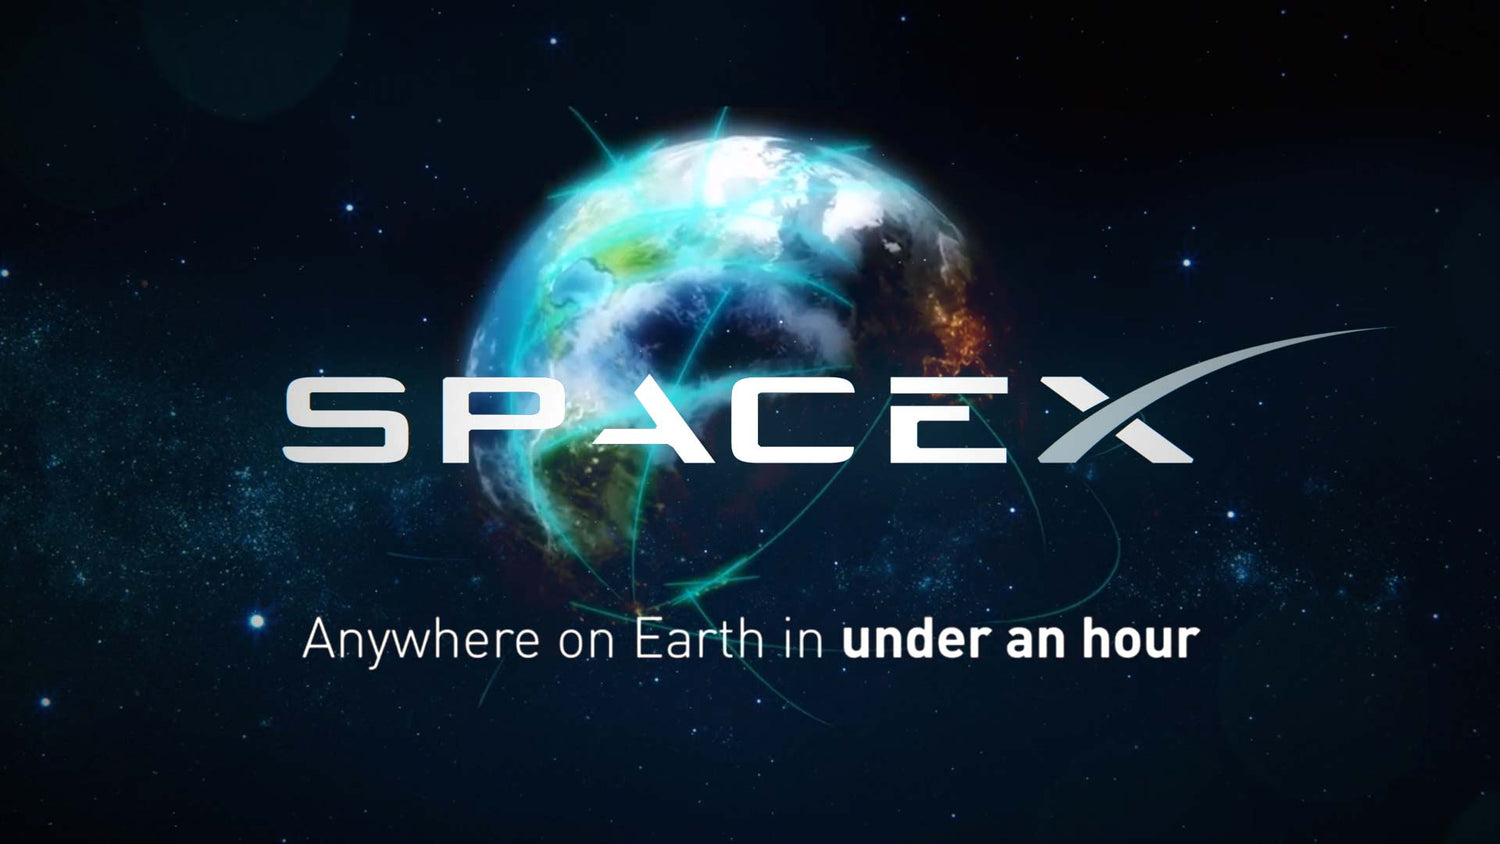 SpaceX plans to fly you anywhere on Earth in under an hour using Starship